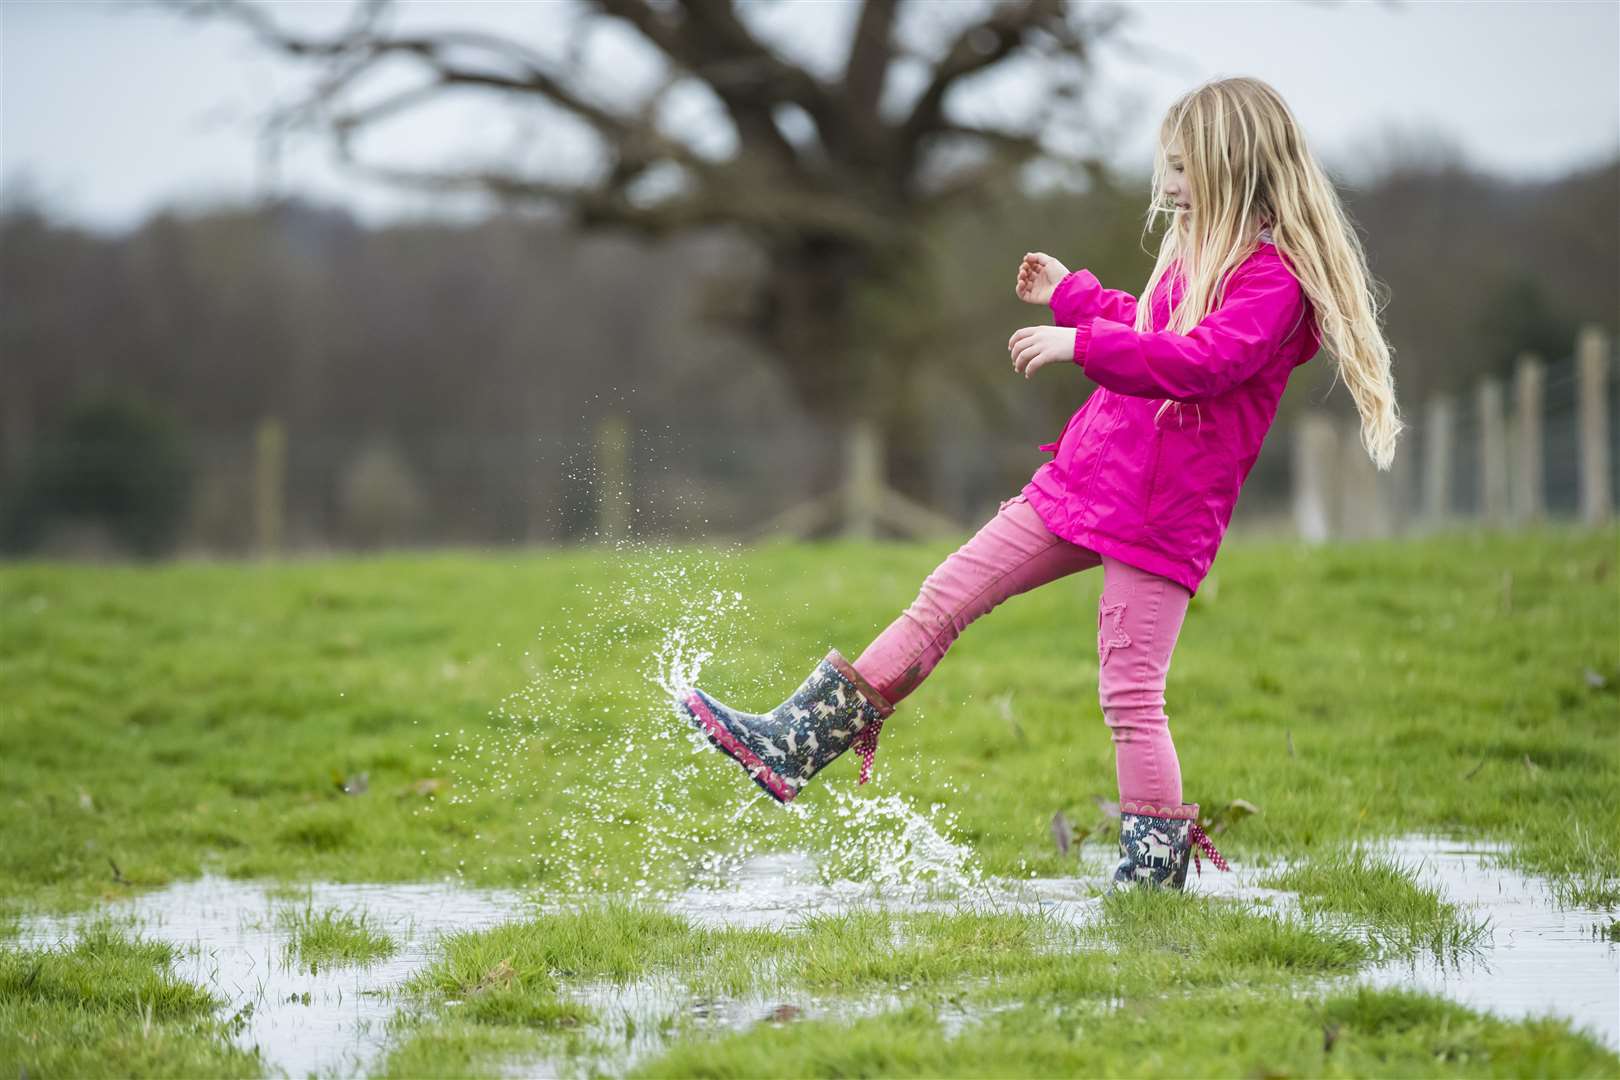 The National Trust is encouraging families to get out whatever the weather